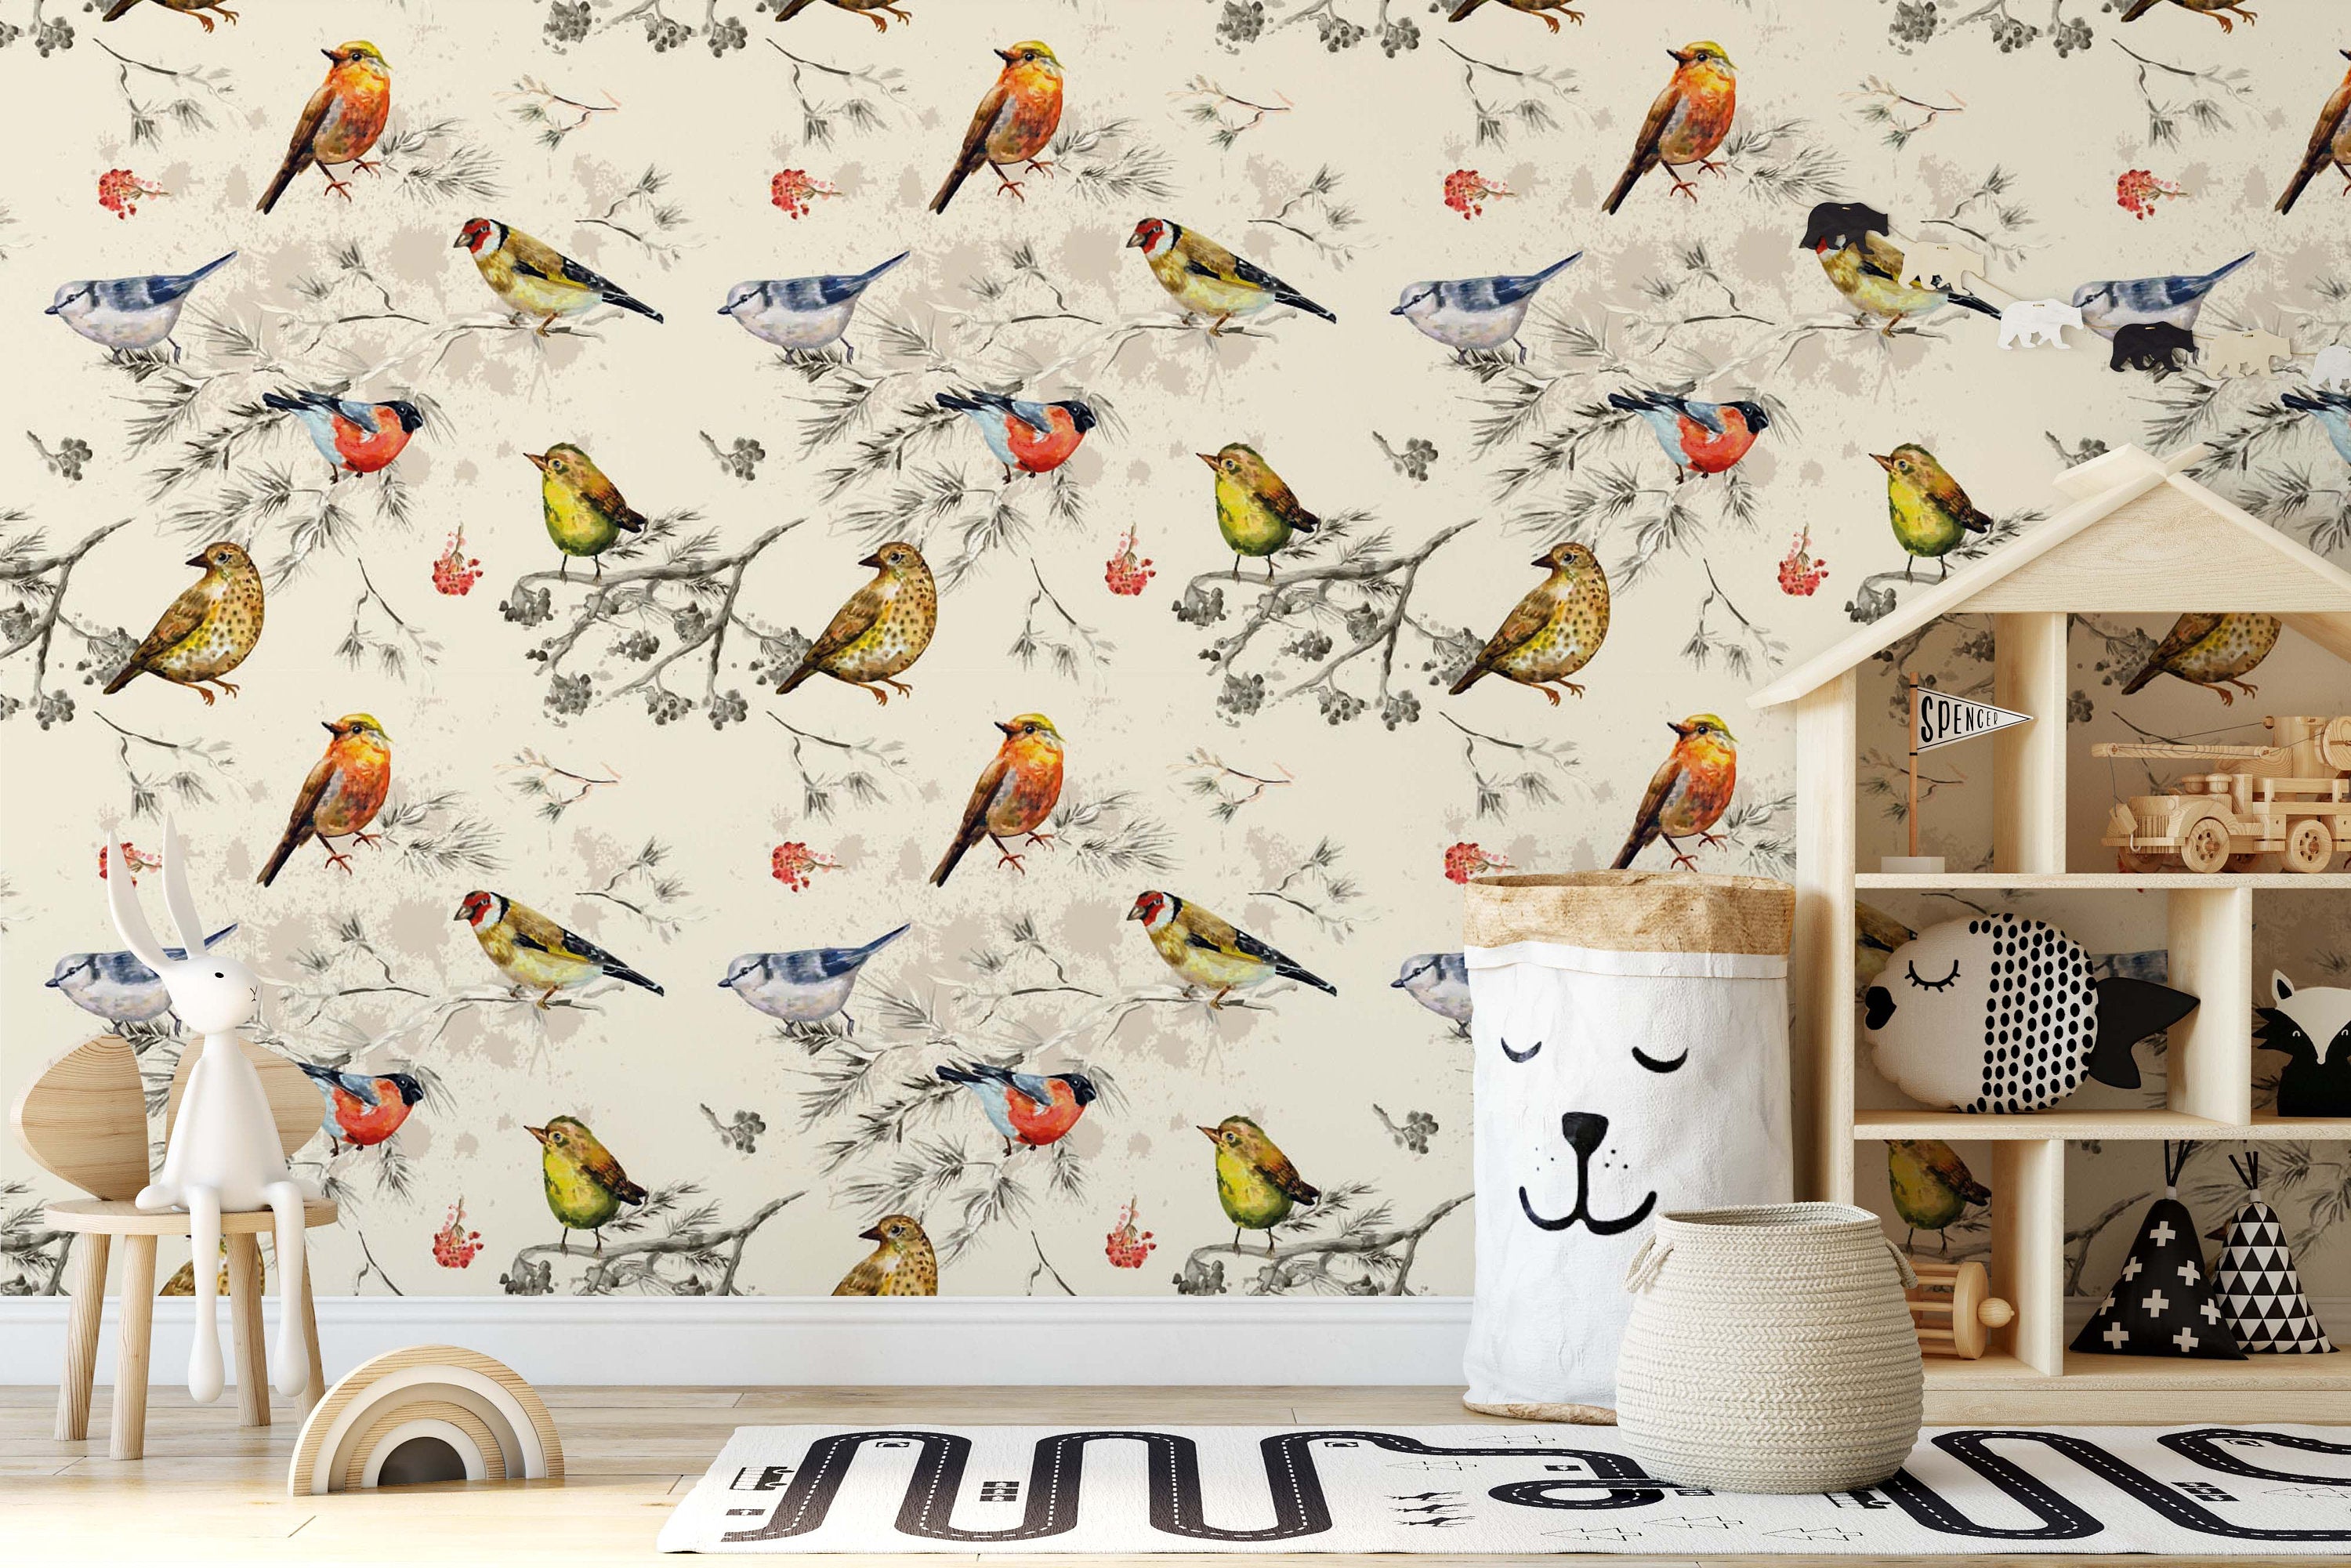 Vintage Texture Colorful Little Birds Watercolor Wallpaper Self Adhesive Peel and Stick Wall Sticker Wall Decoration Scandinavian Removable